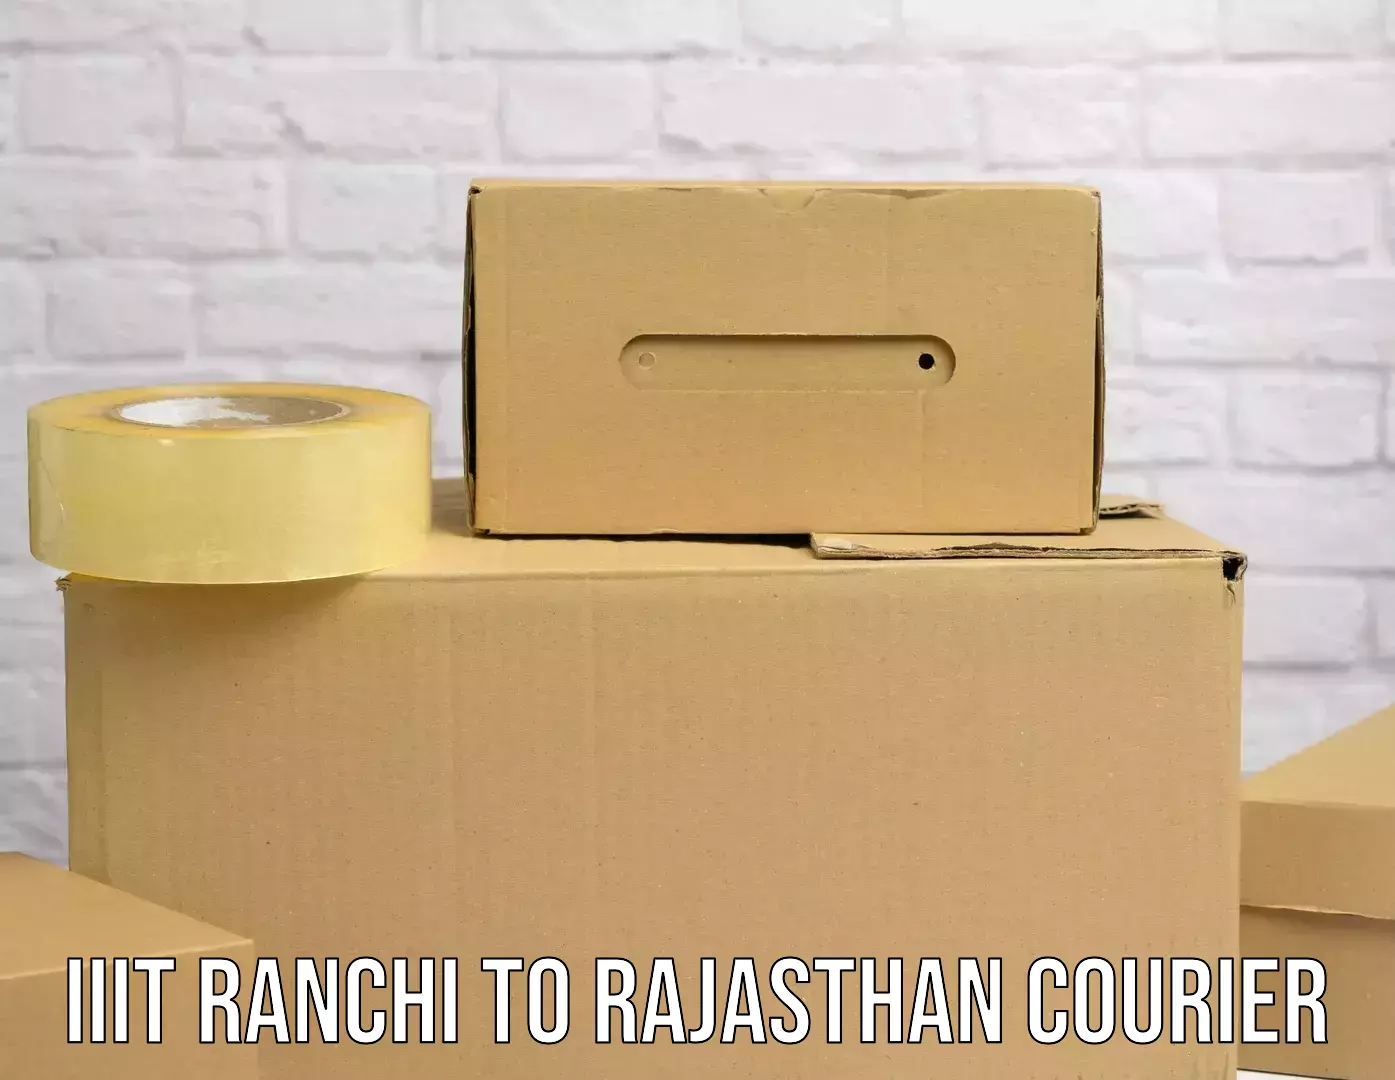 Efficient freight service IIIT Ranchi to Rajasthan